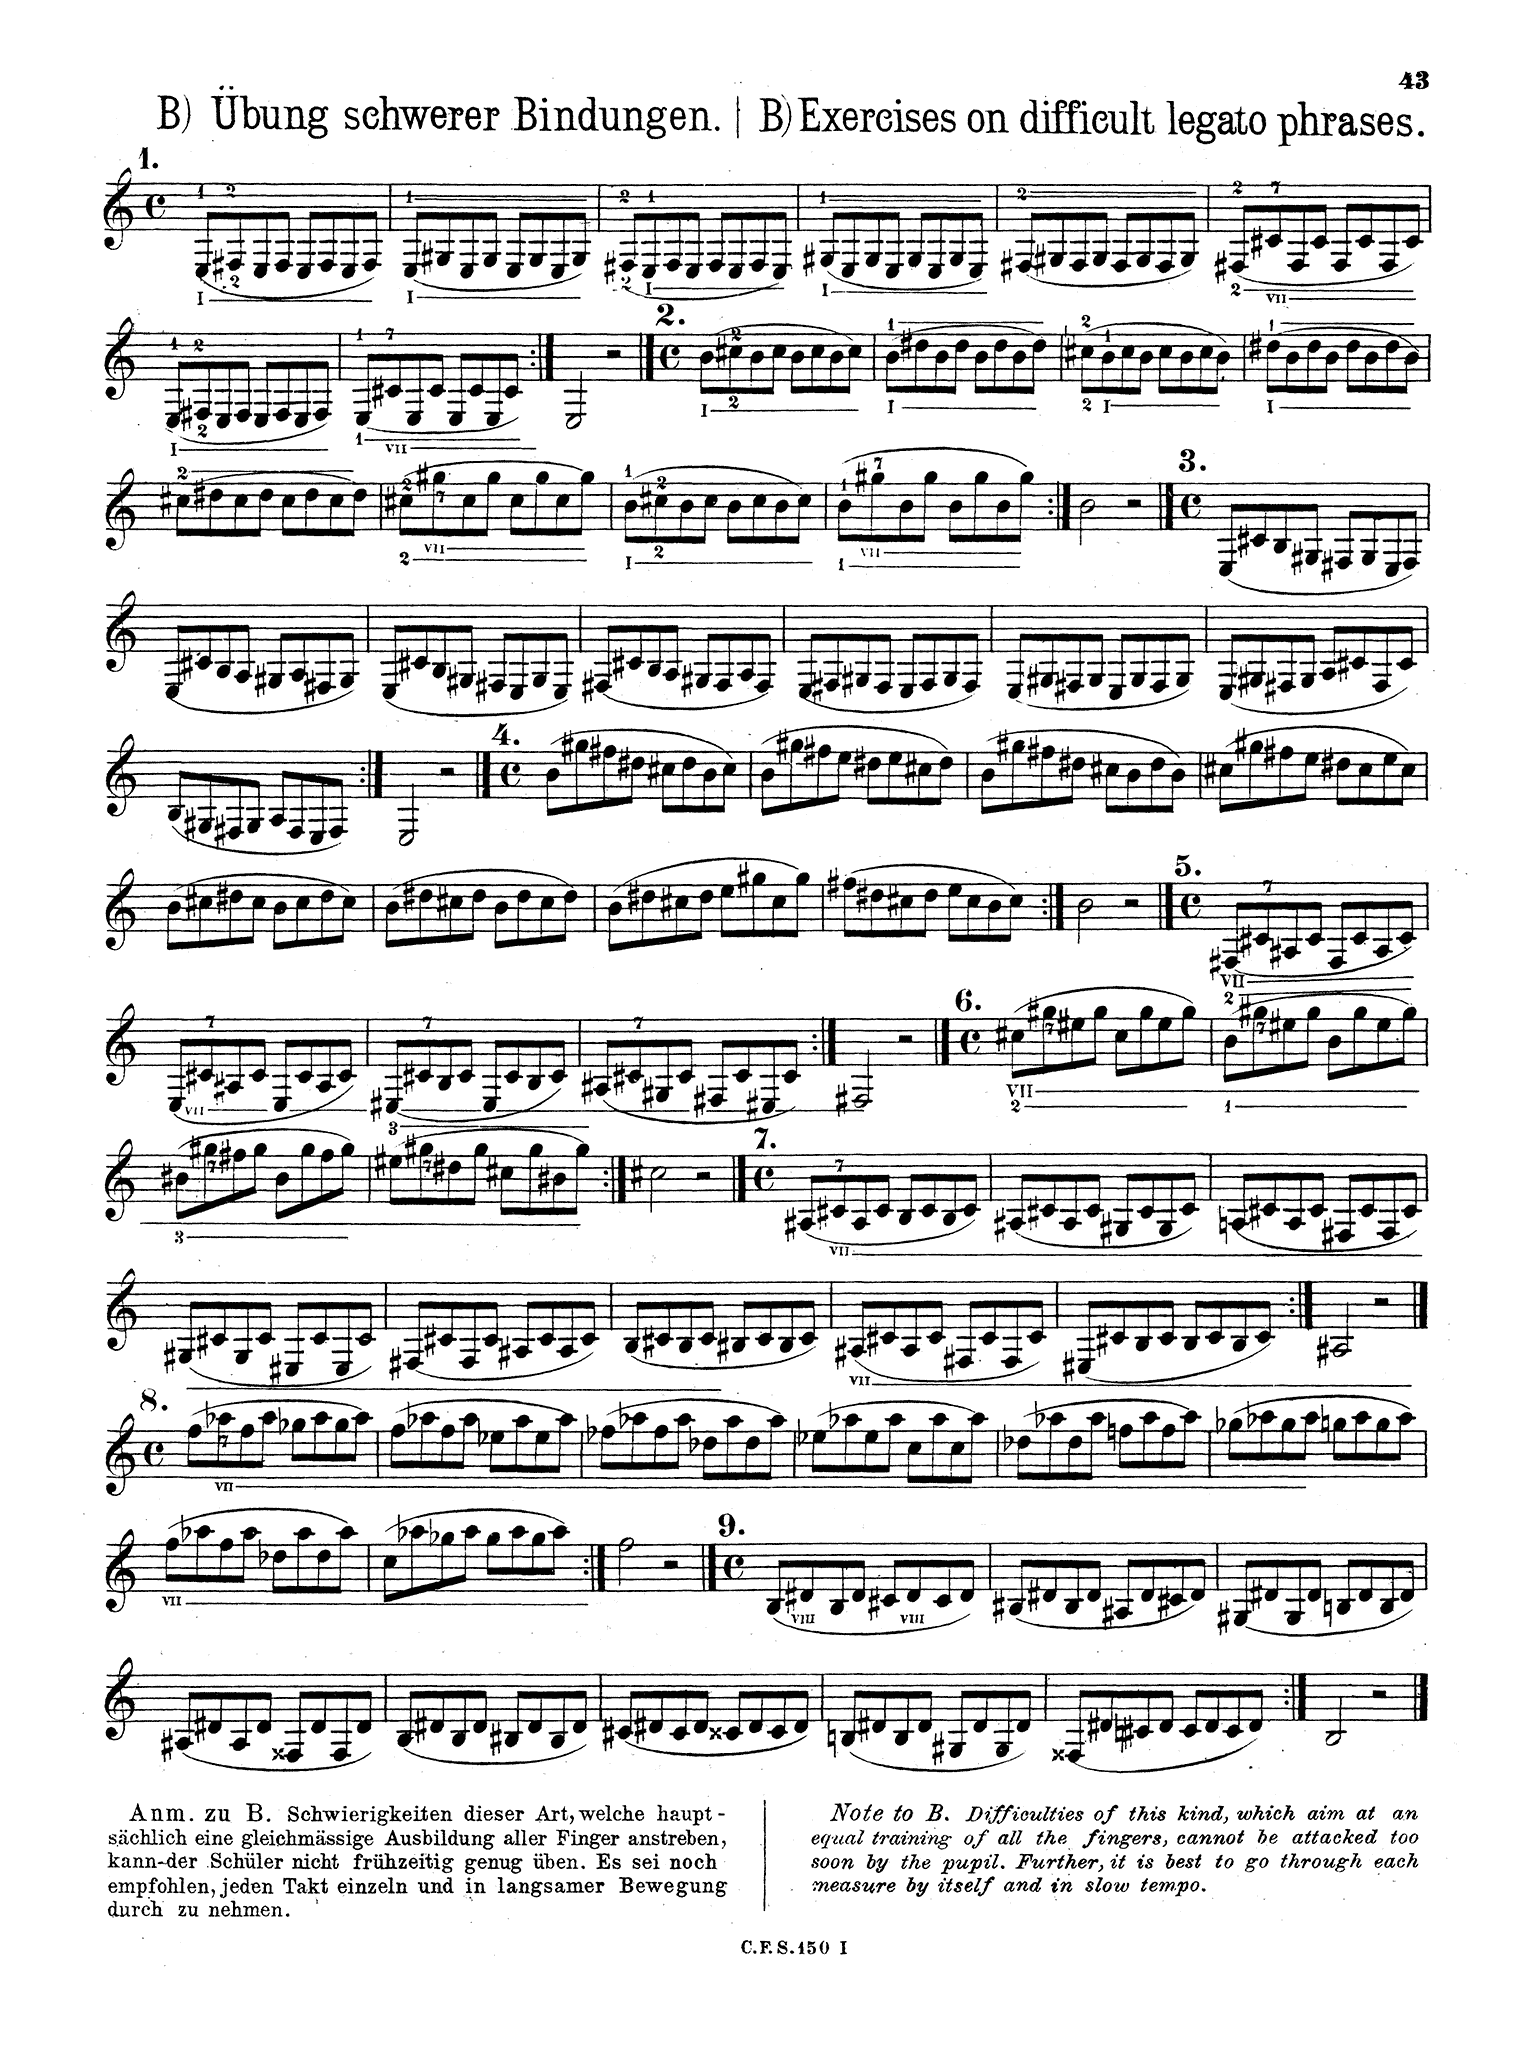 Stark Clarinet Method, Op. 49, Vol. 1: Section 1 of 2 page 43